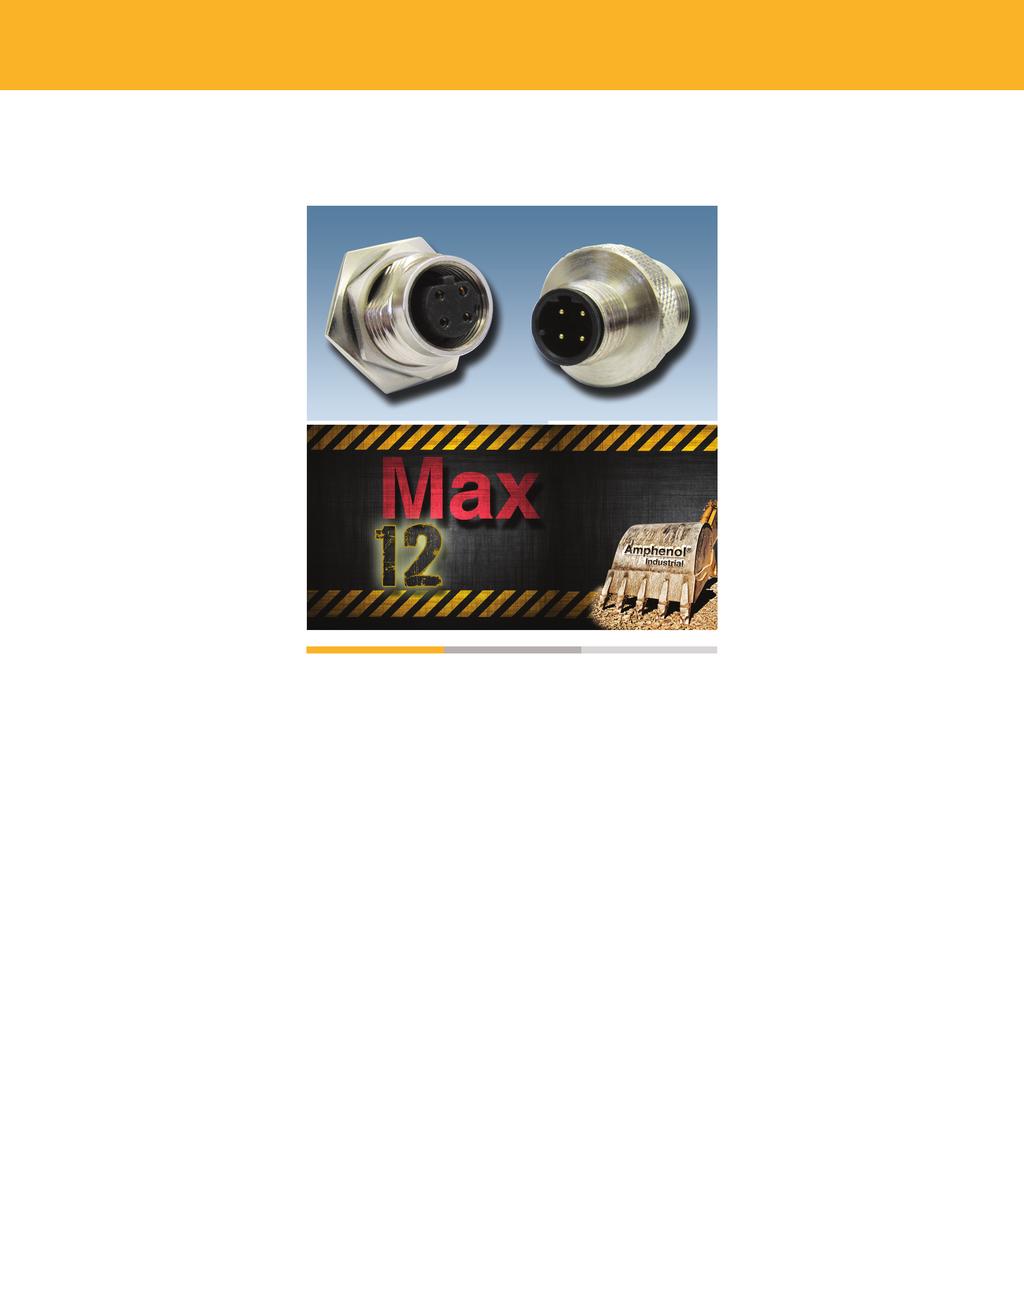 IDS-46-4 Amphenol Max-M12 Connector Amphenol Industrial Products Group introduces our ruggedized M12 high speed data connector, the Max-M12.